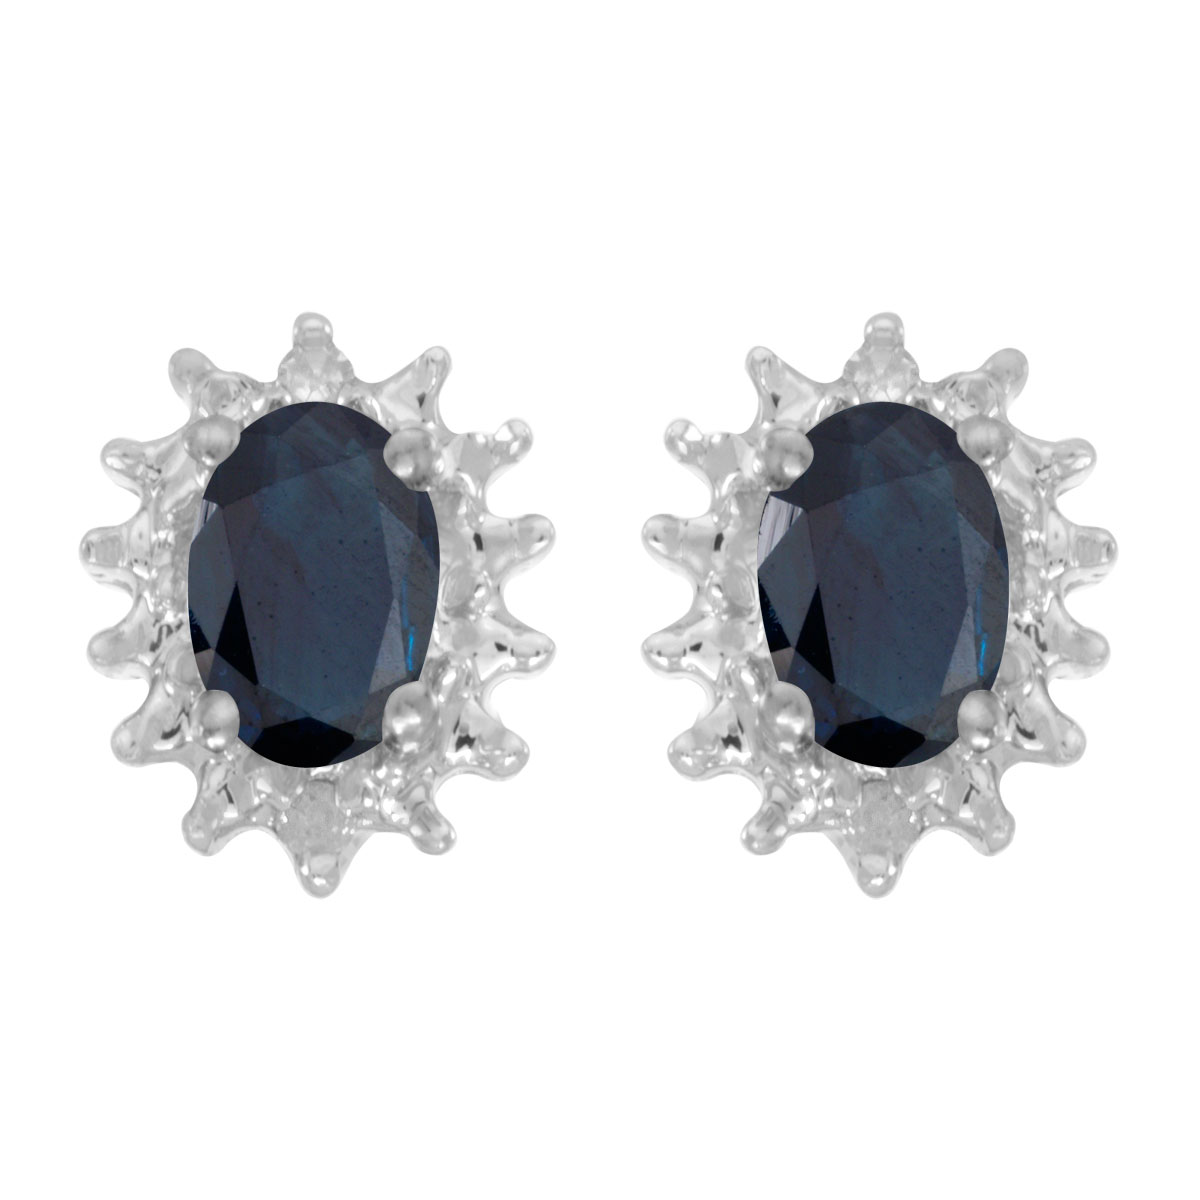 JCX2009: These 14k white gold oval sapphire and diamond earrings feature 6x4 mm genuine natural sapphires with a 0.78 ct total weight and .04 ct diamonds.